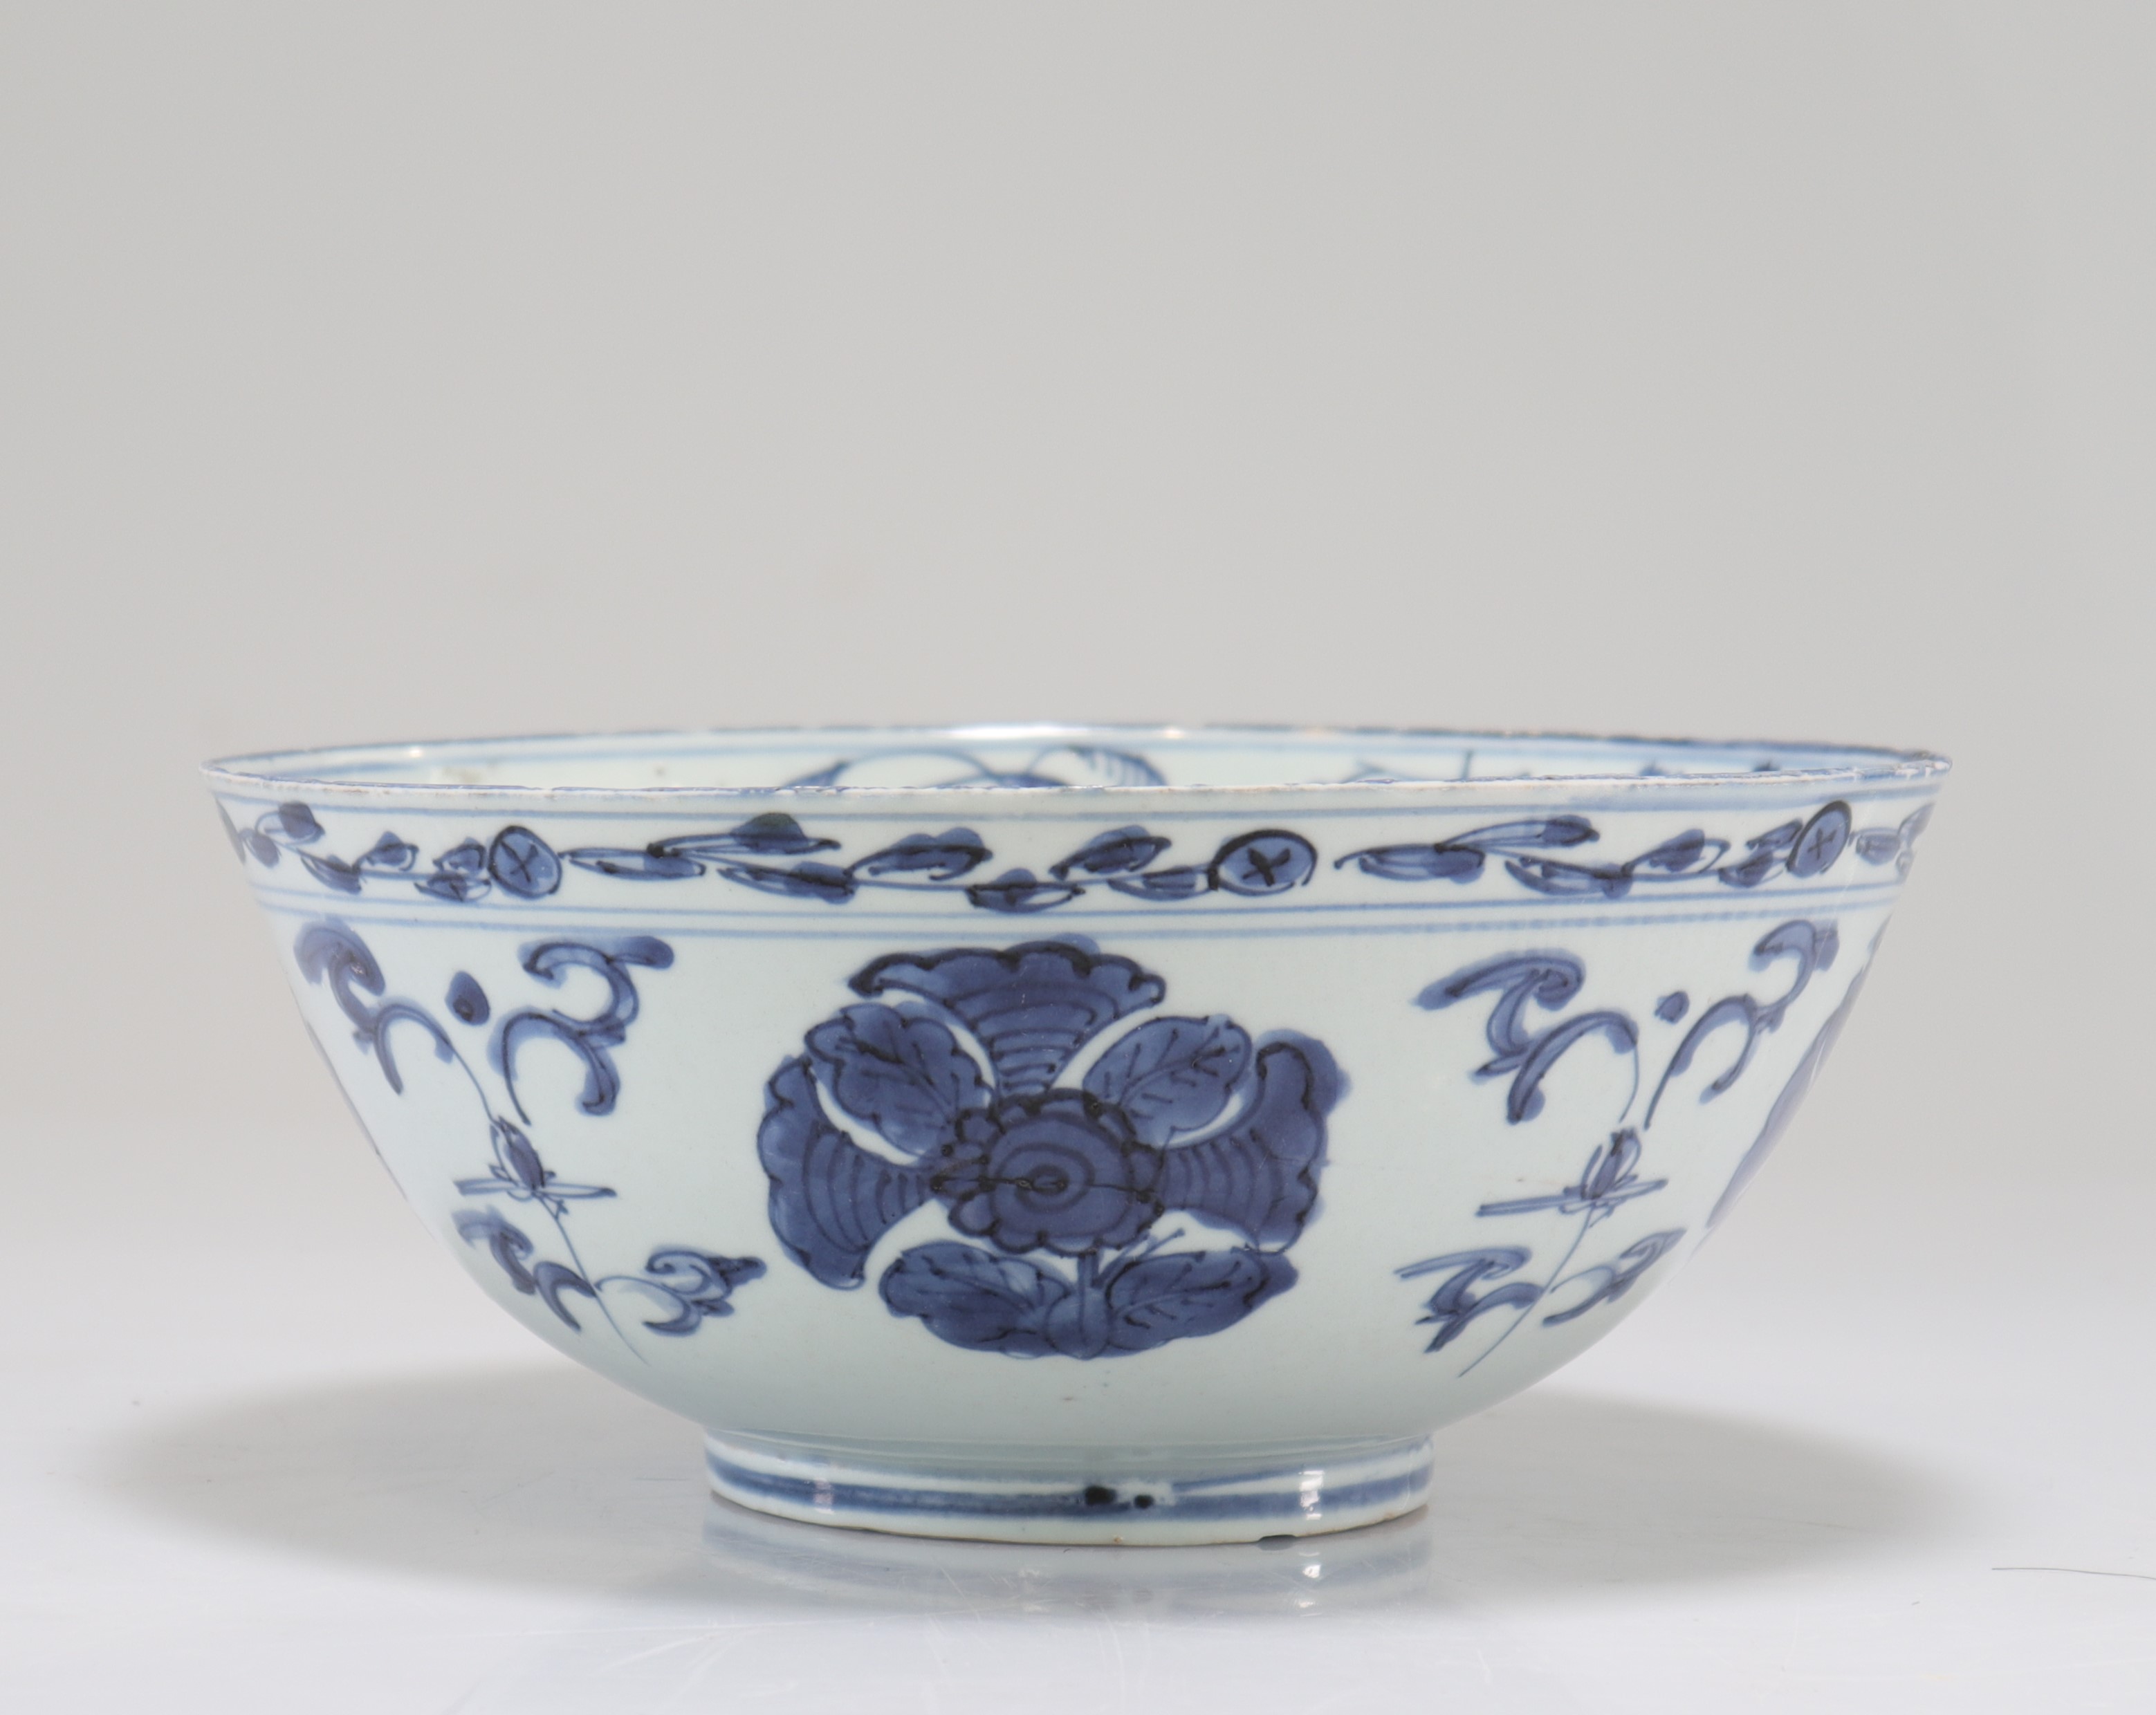 Large "blanc-bleu" porcelain bowl from the Ming period